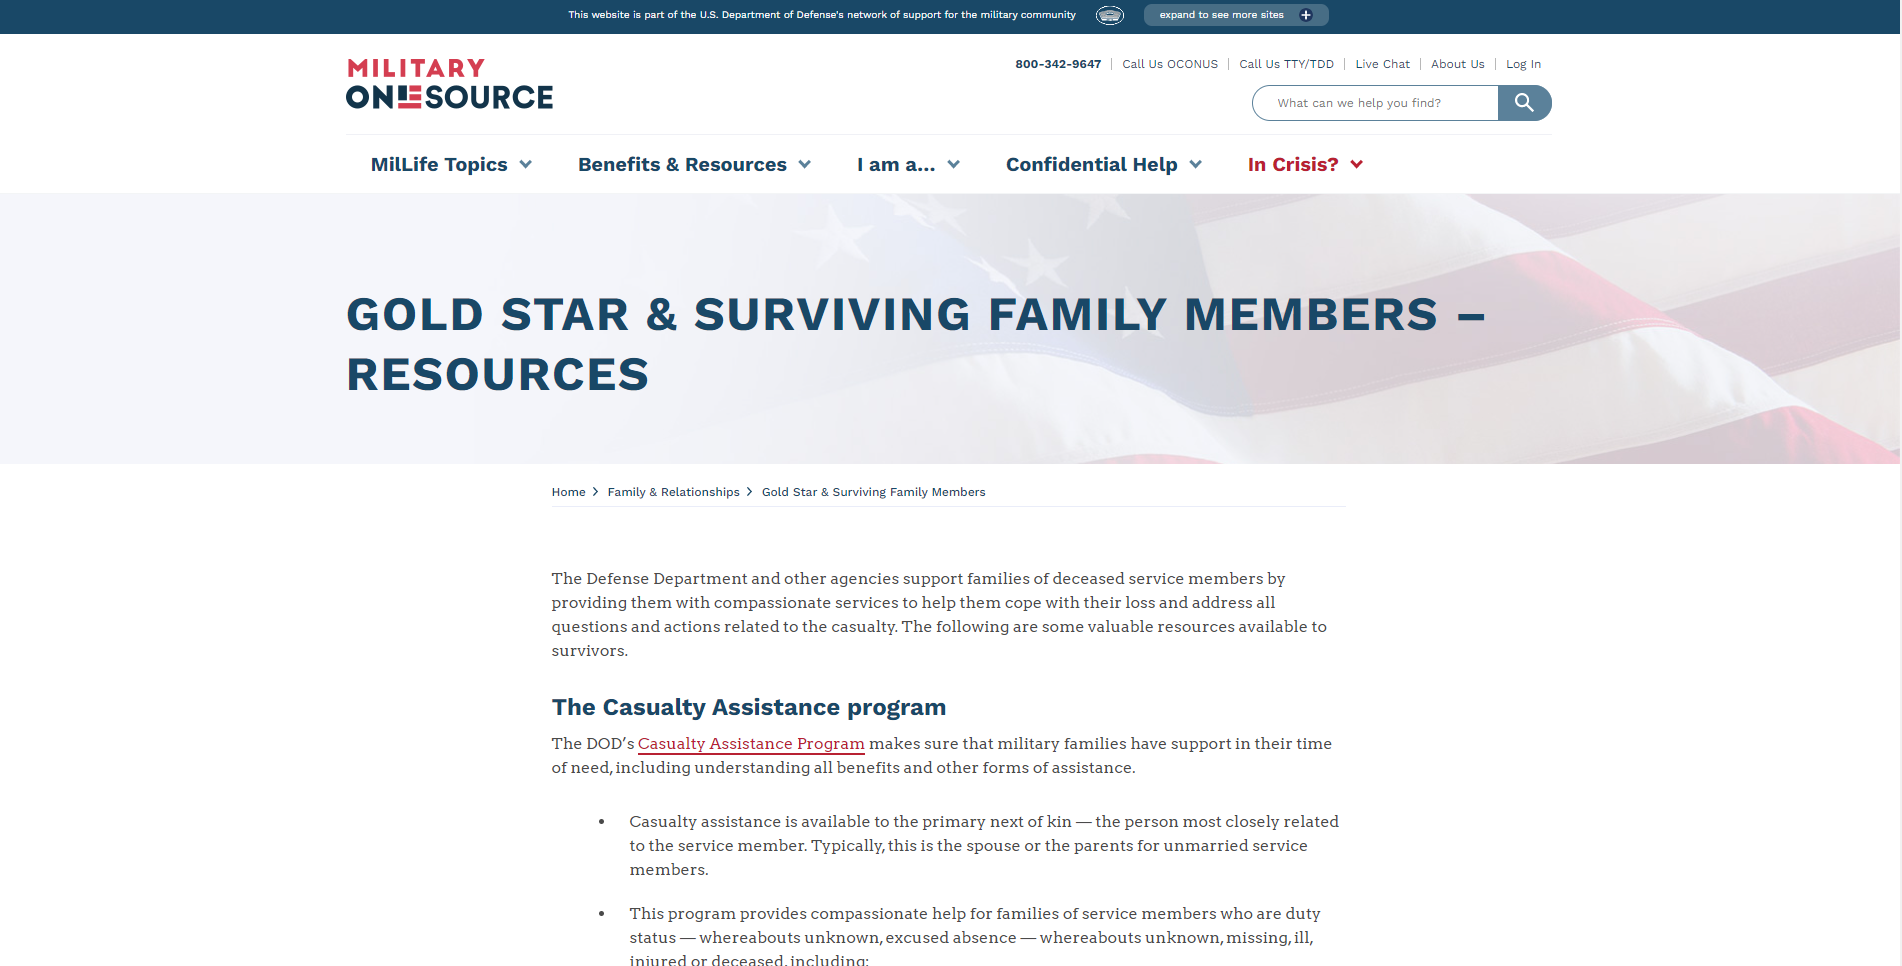 Gold Star & Surviving Family Members Resources